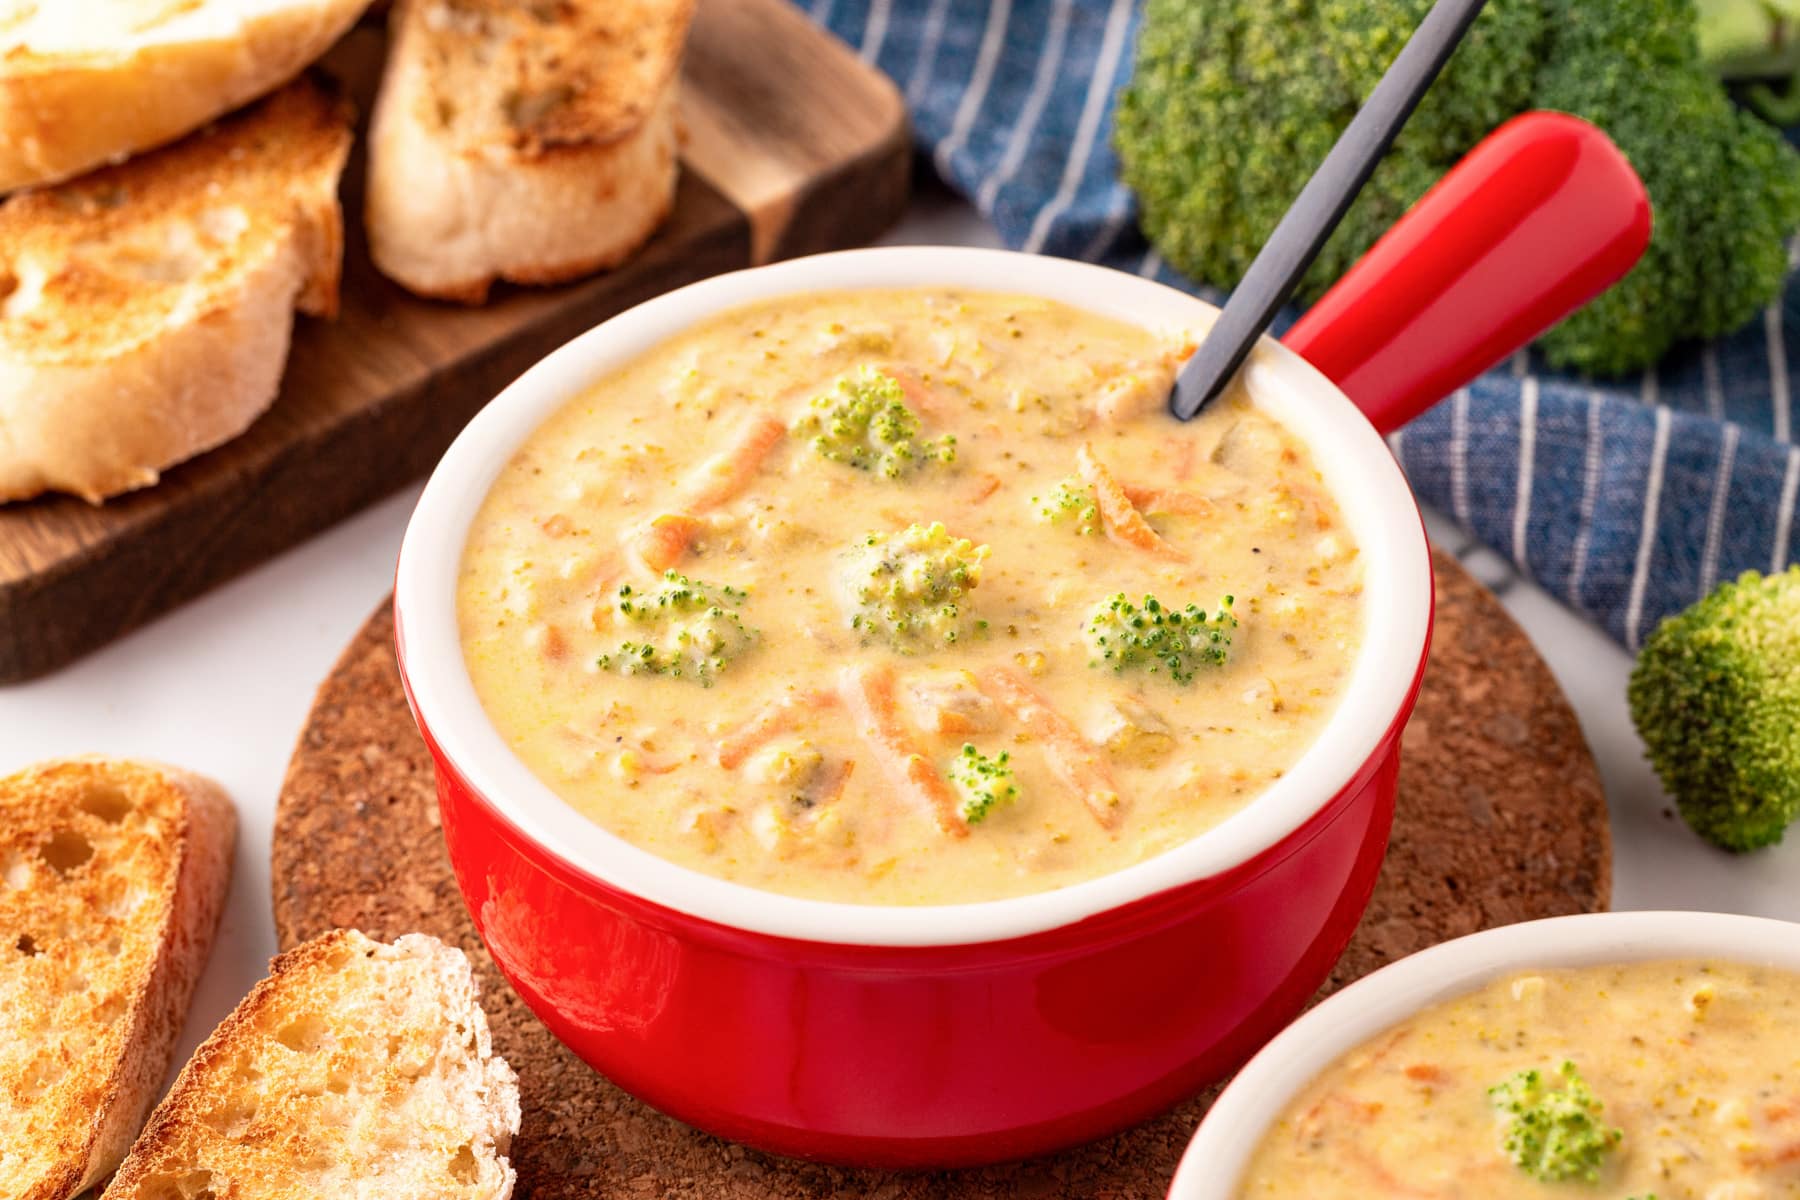 Horizontal picture of broccoli cheese soup in a red bowl with broccoli and toast around it.